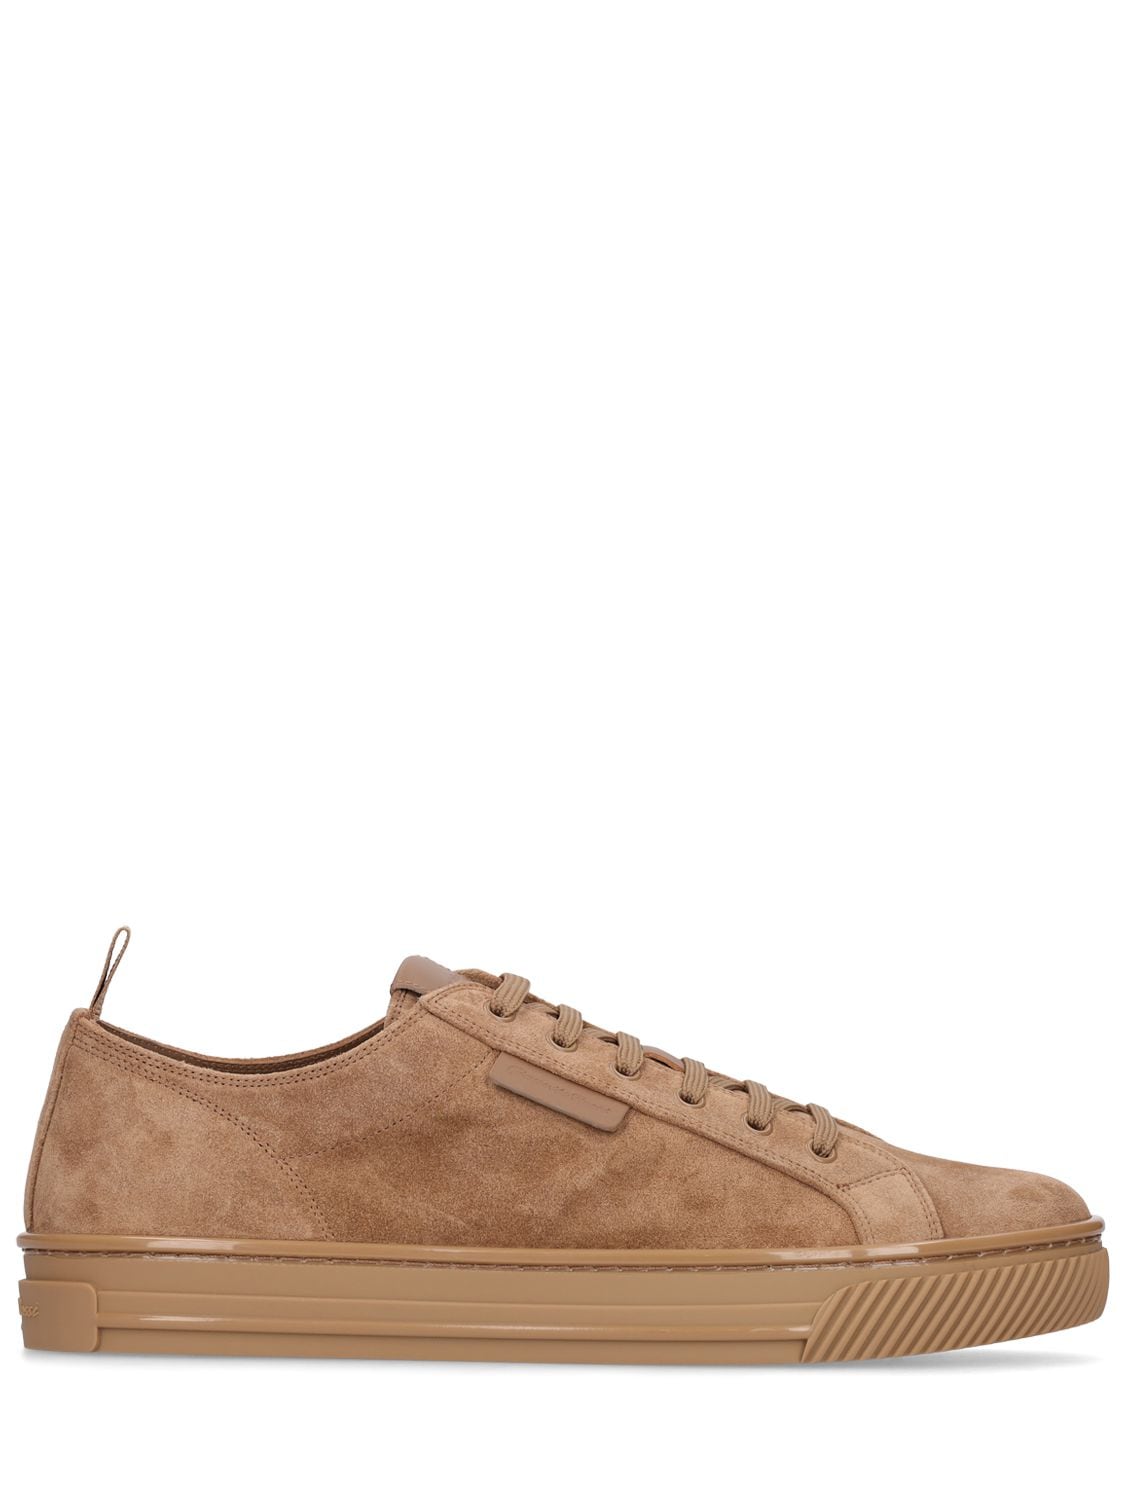 GIANVITO ROSSI SUEDE LOW SNEAKERS